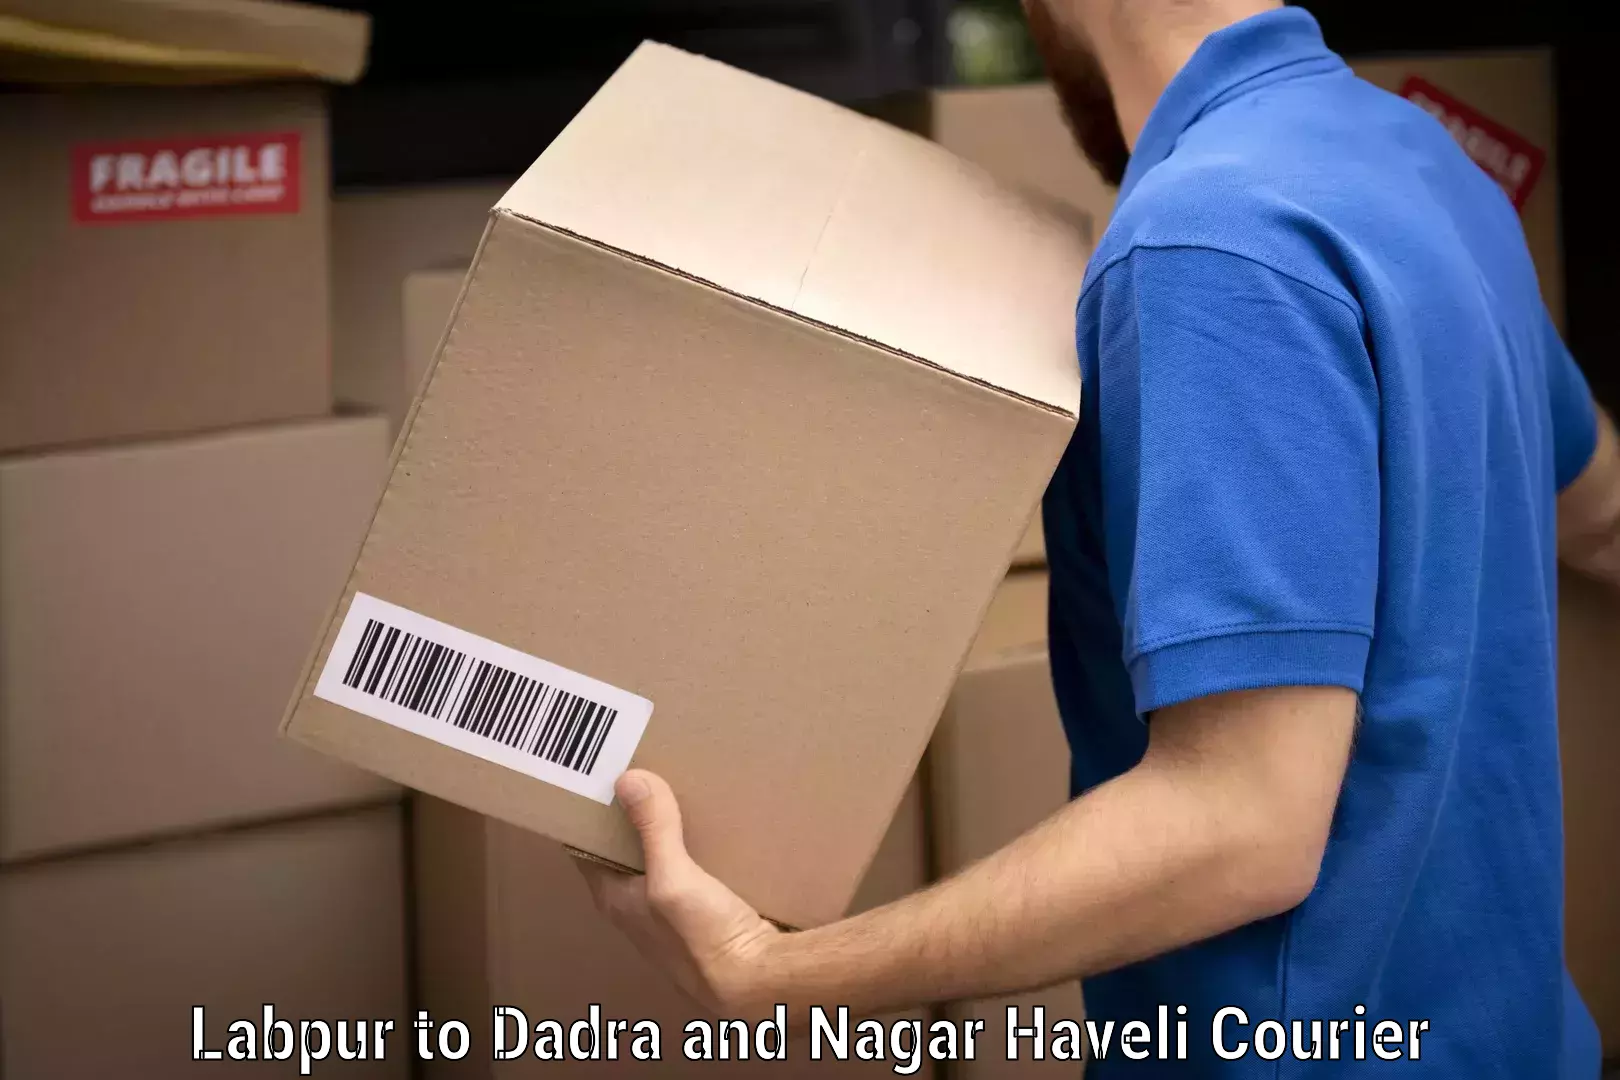 Efficient packing and moving in Labpur to Dadra and Nagar Haveli